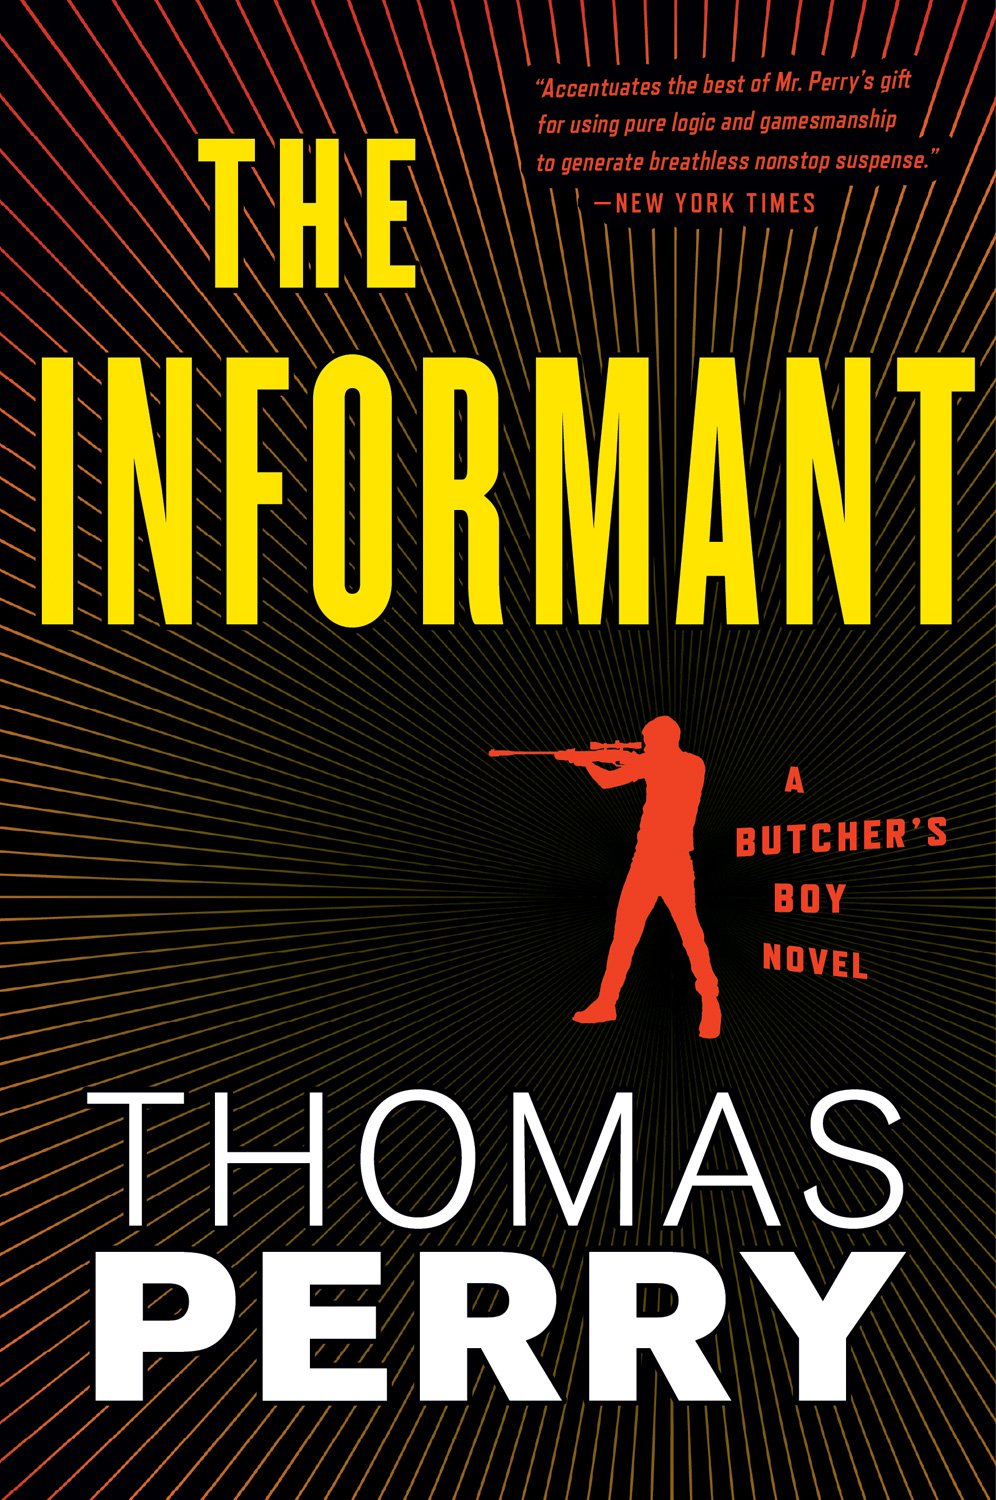 Book cover of The Informant